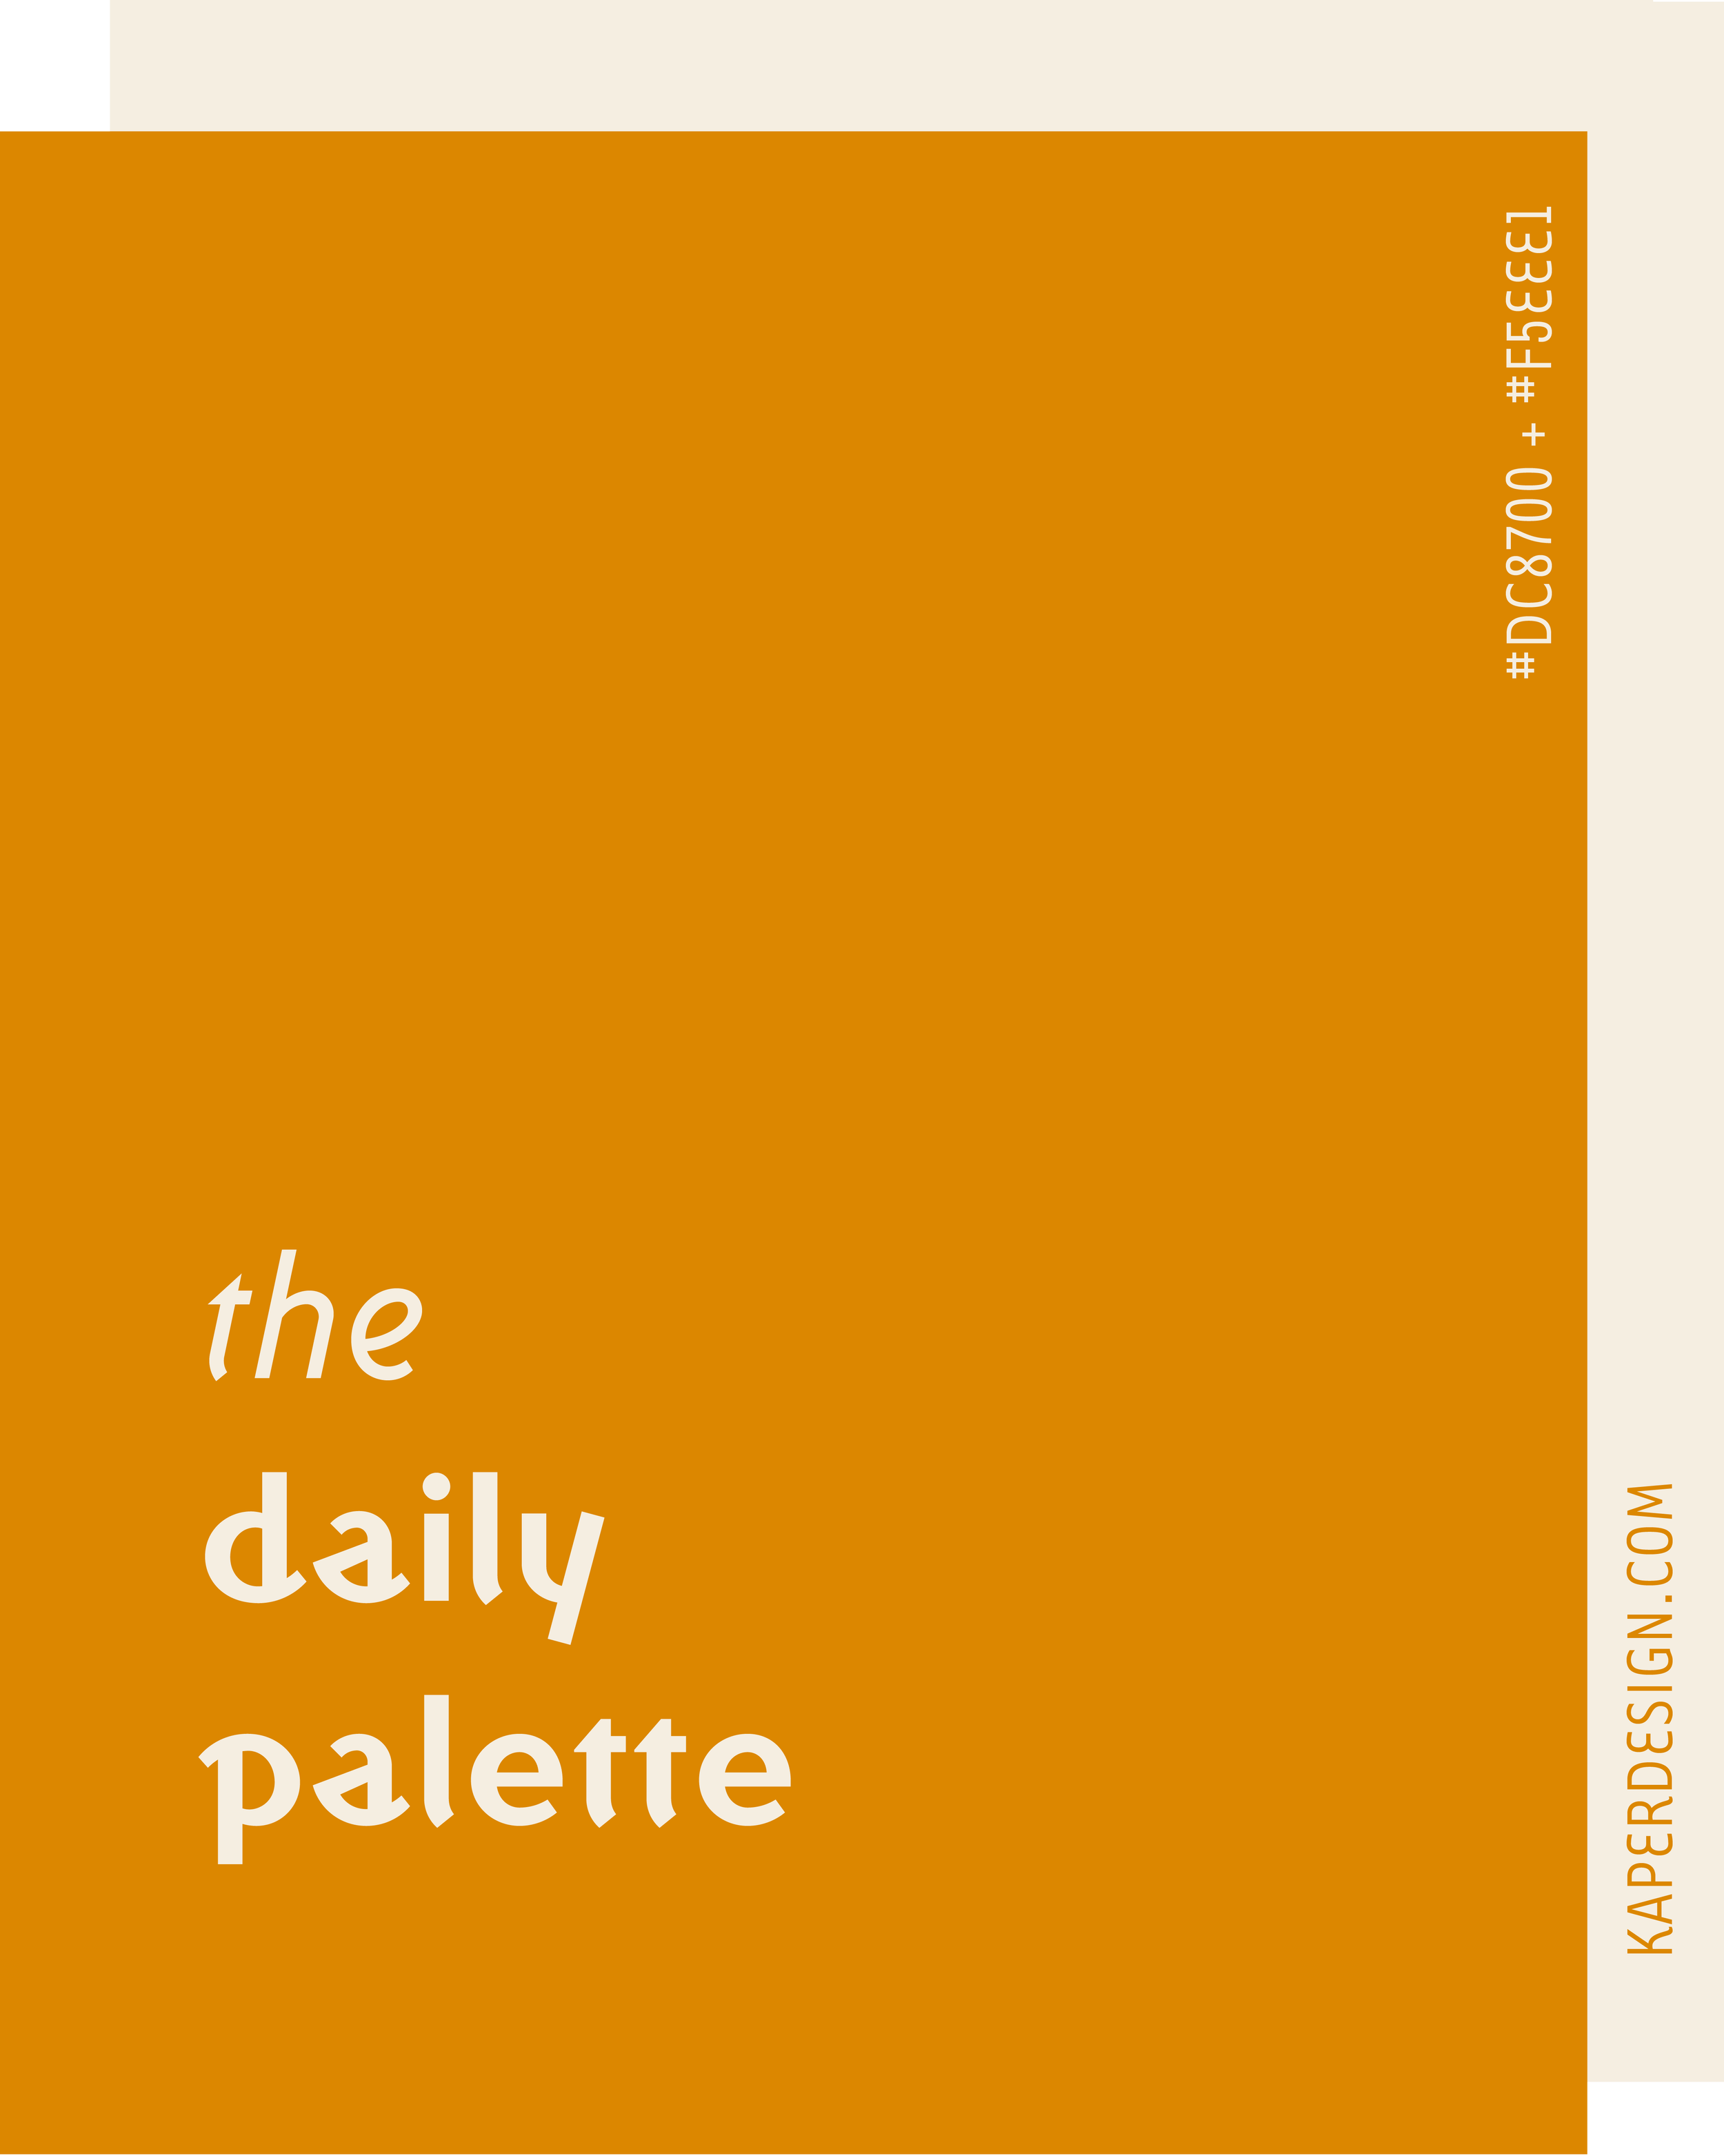 Kaper Design_the Daily Palette Project-14.png